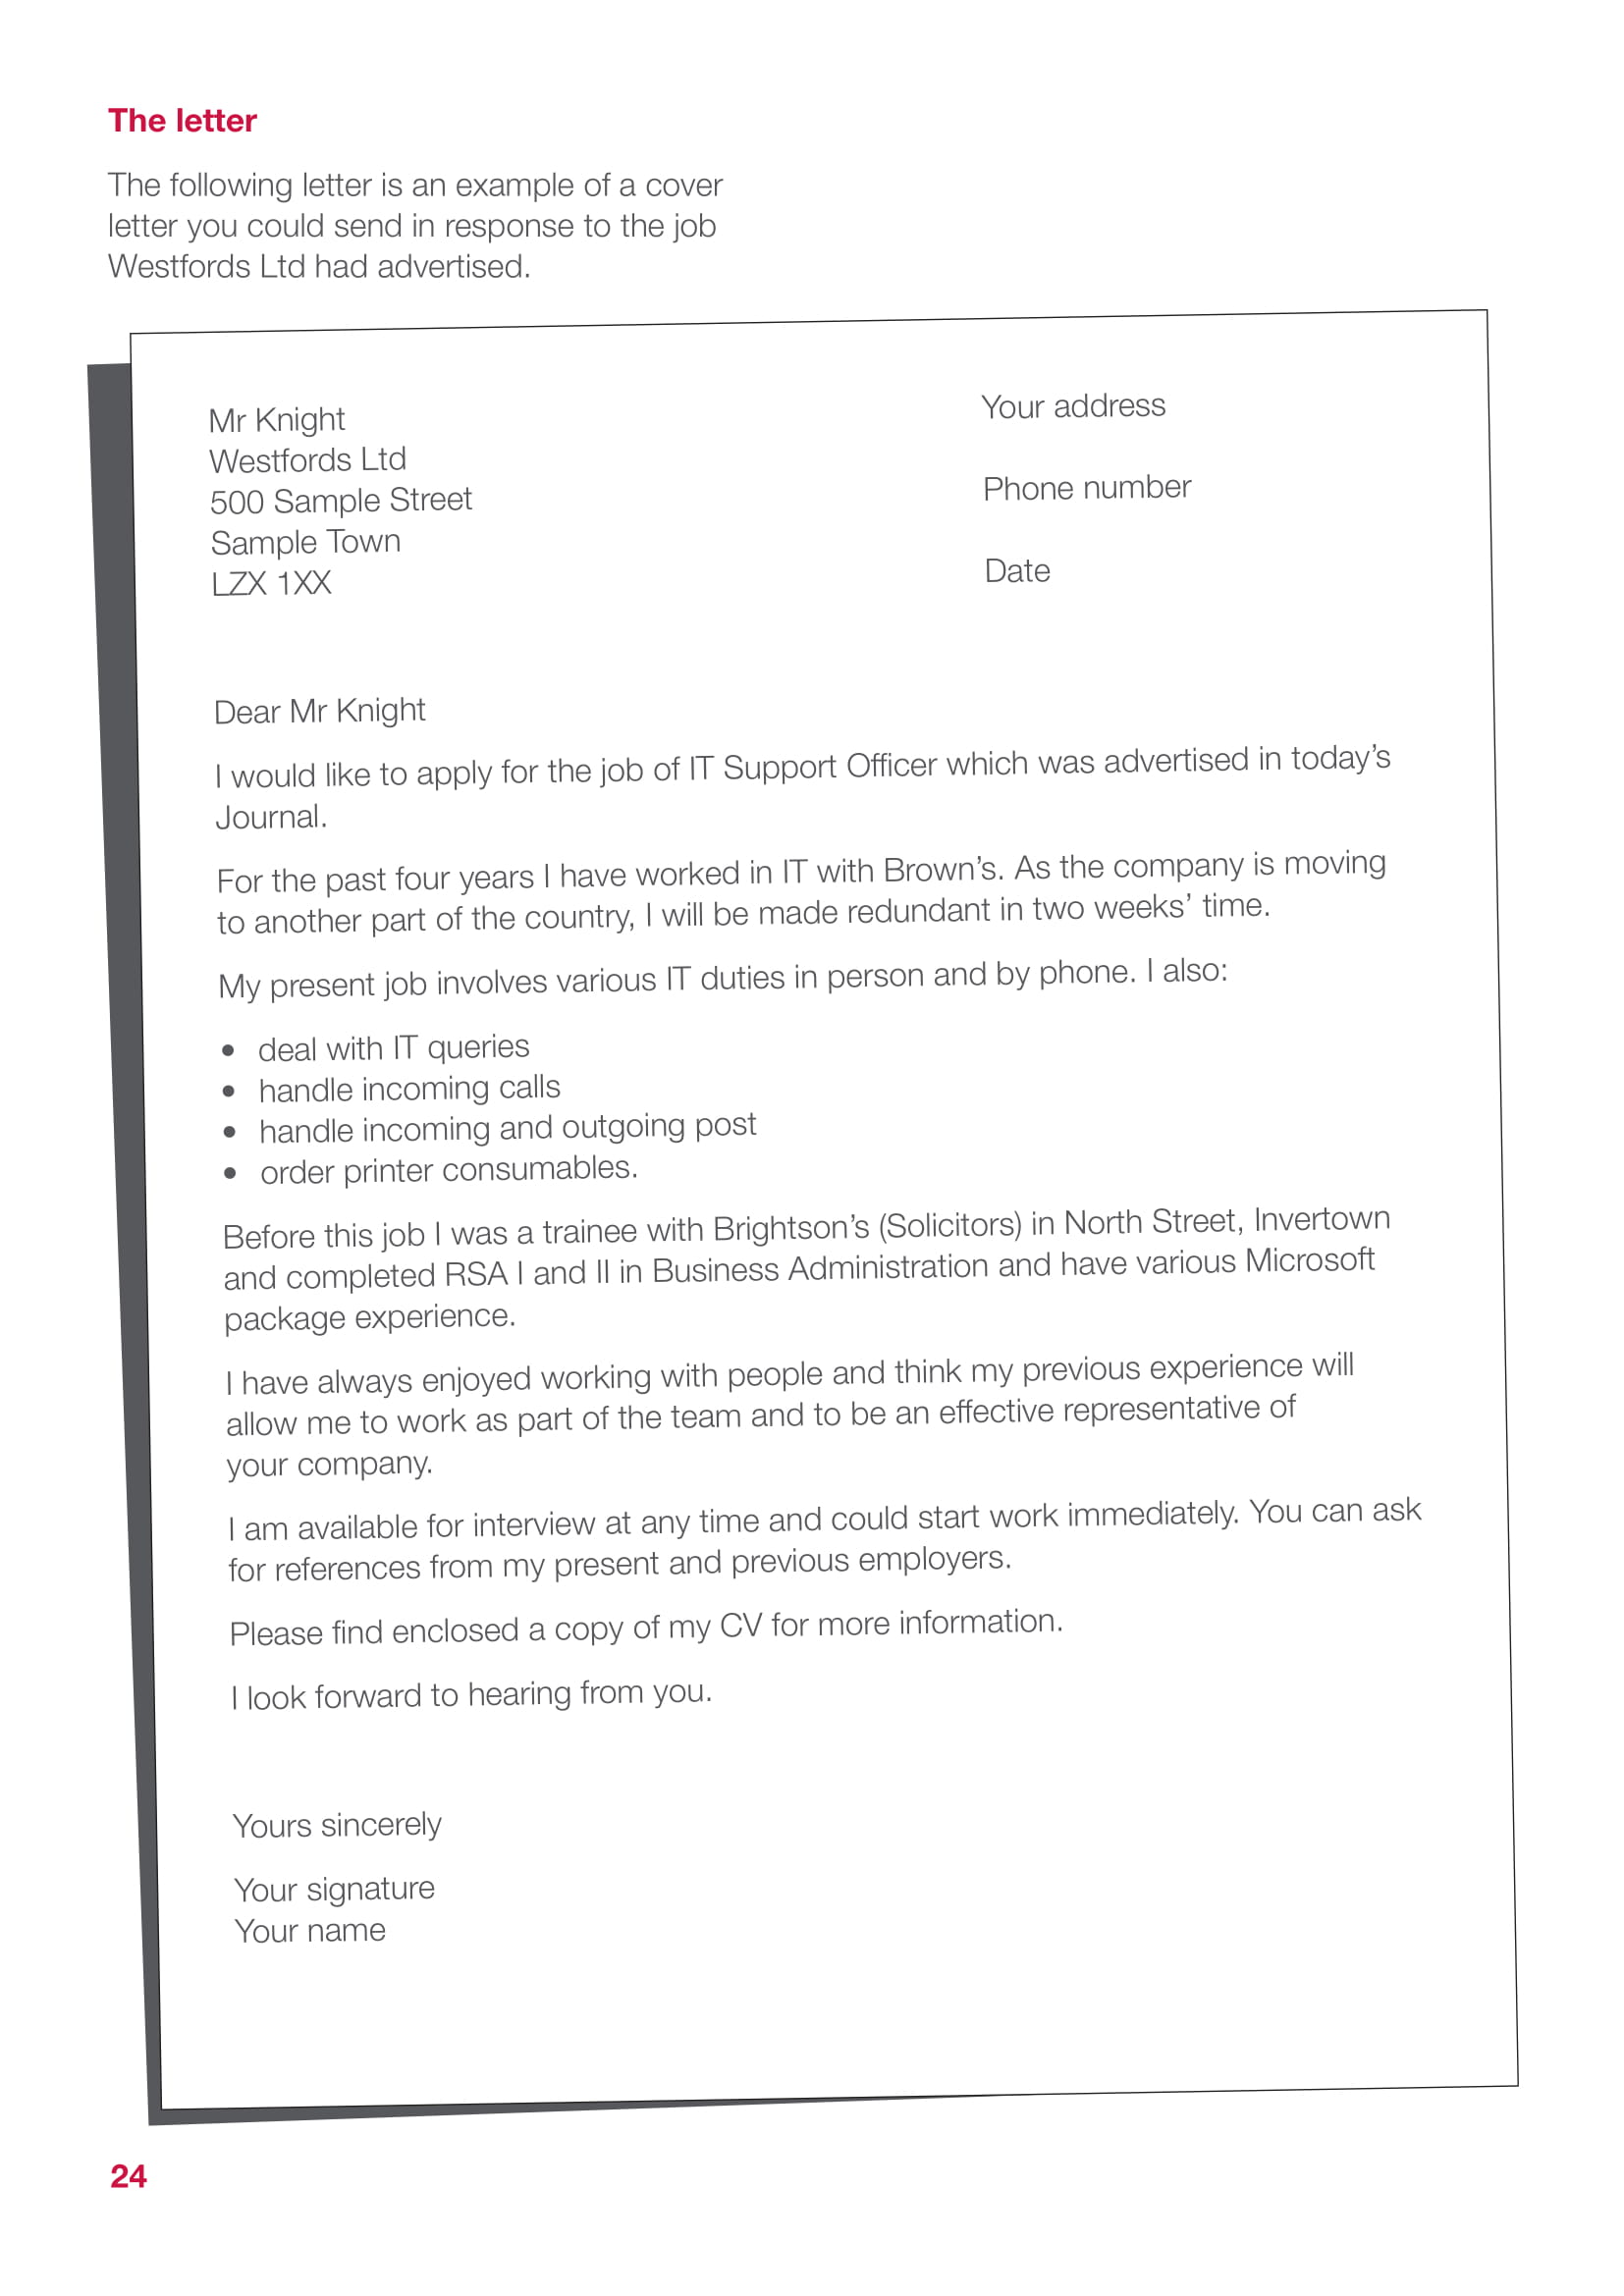 example format of professional cover letter